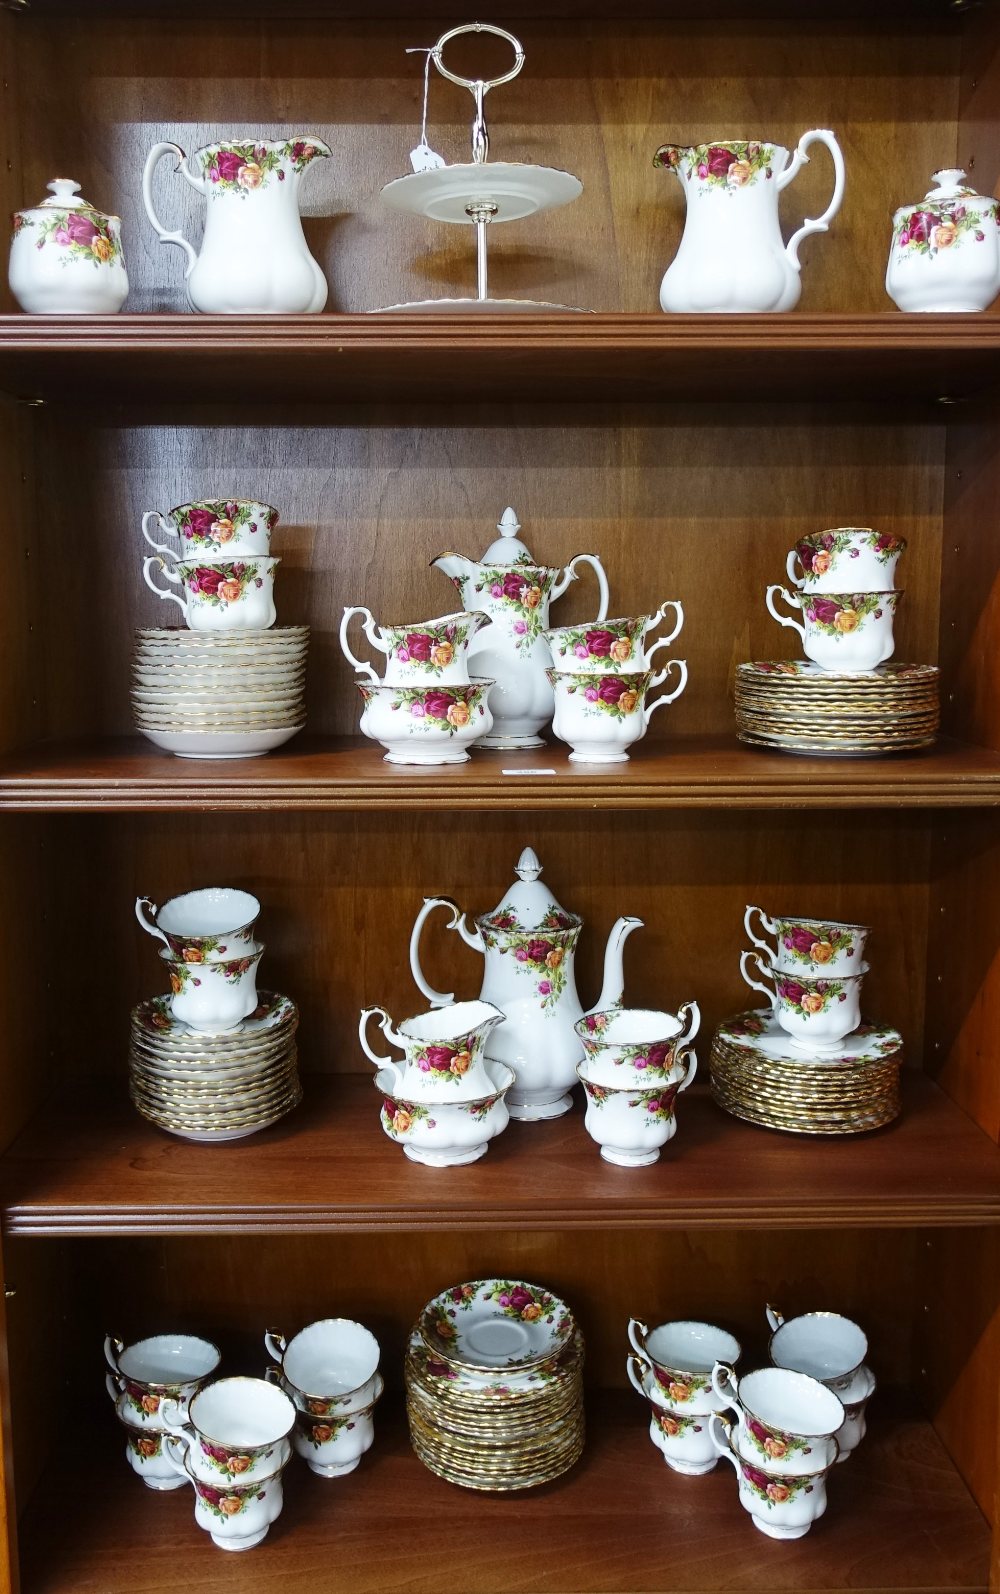 An extensive Royal Albert Old Country Roses teaset comprising cups, saucers, side plates, two tier